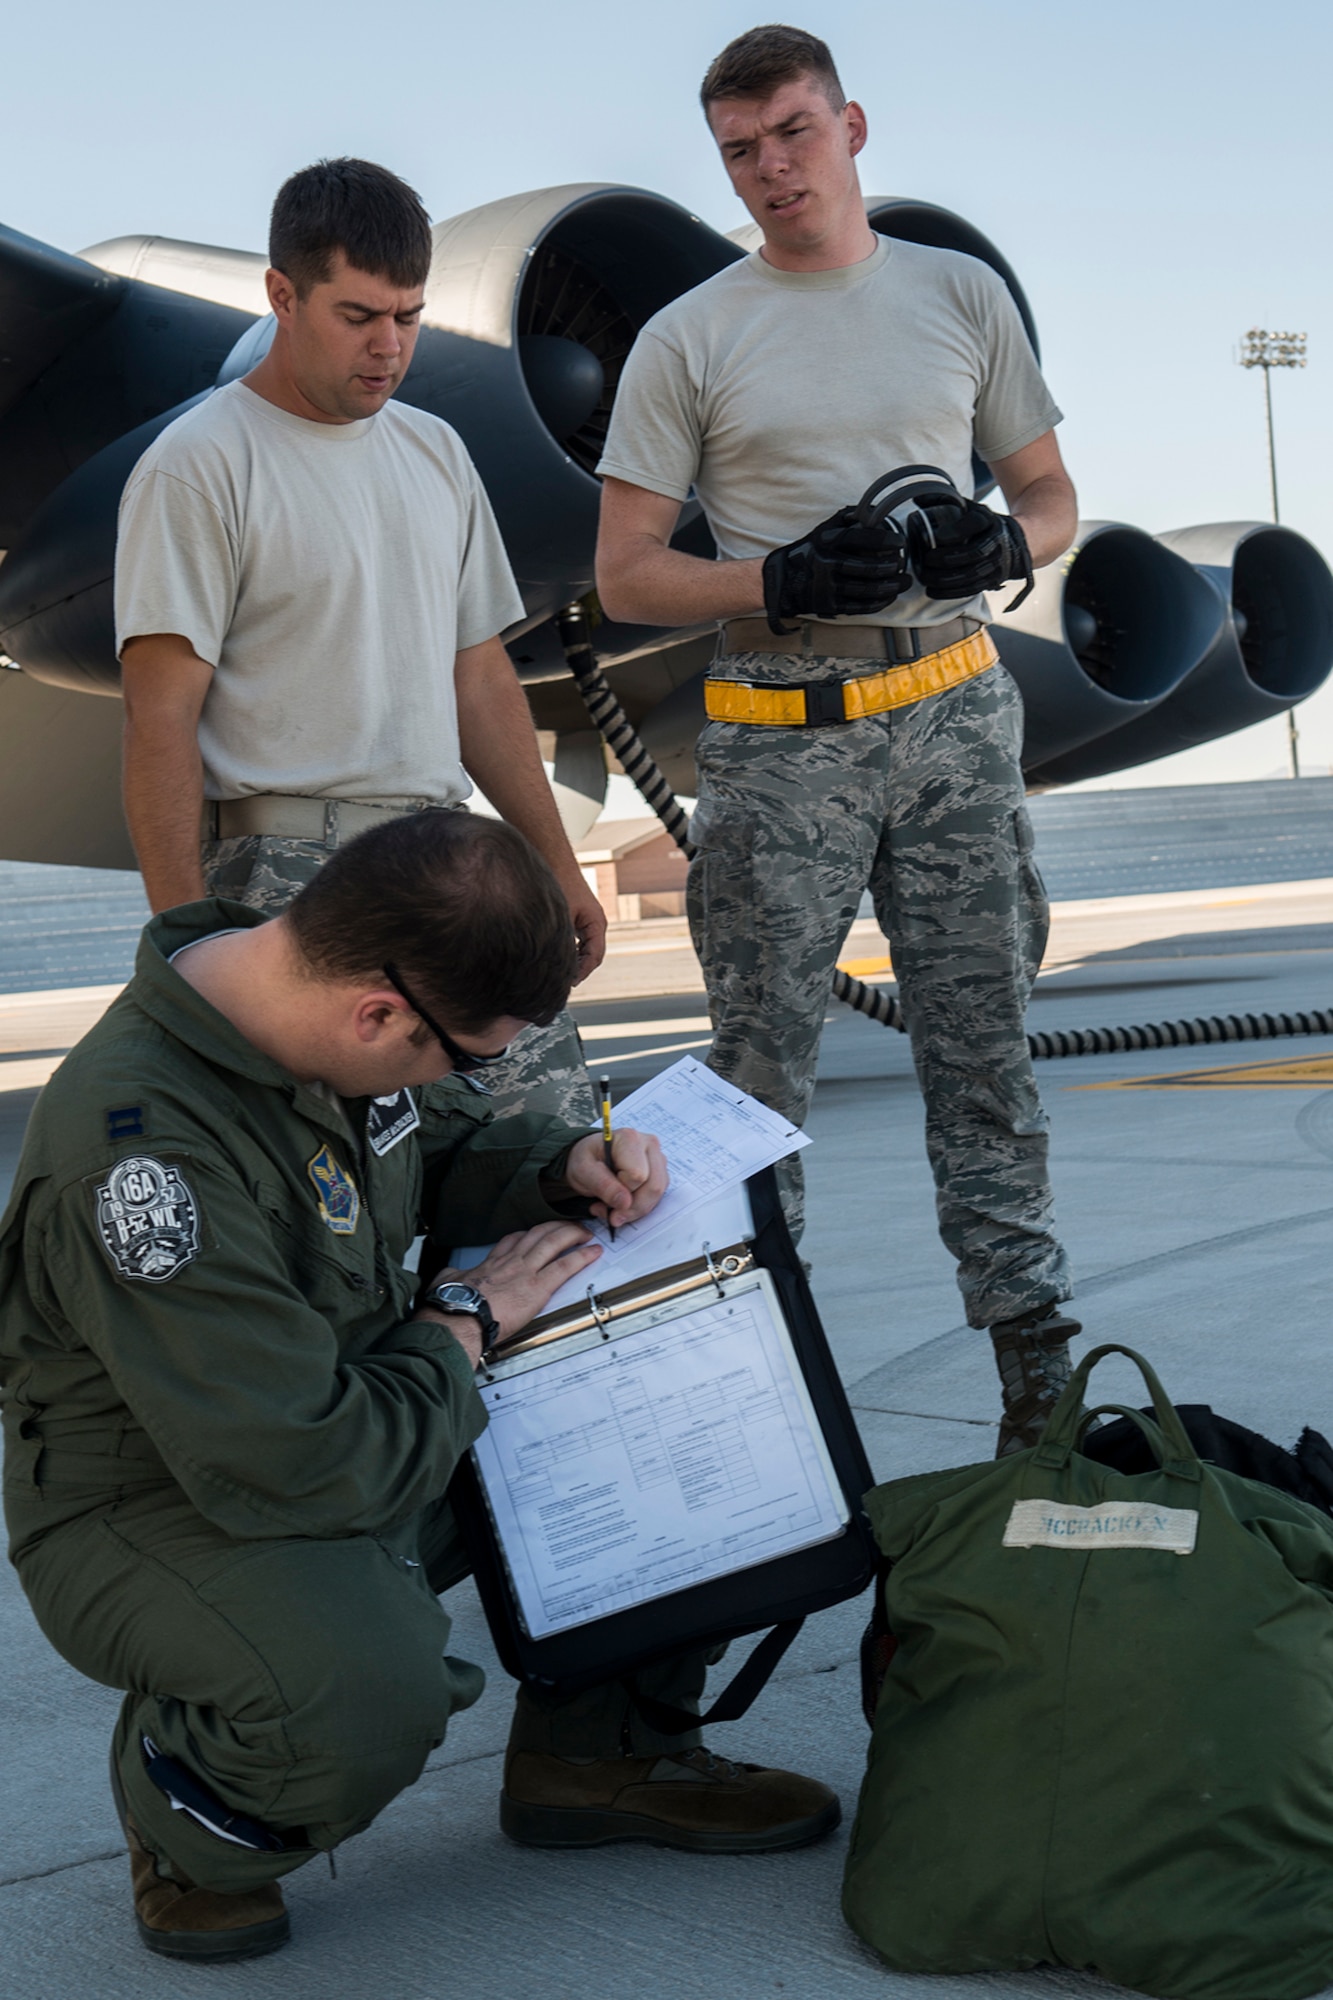 U.S. Air Force B-52H Stratofortress crew chiefs Staff Sgt. Patrick Deslauriers (left), 307th Aircraft Maintenance Squadron, and Airman First Class Jacob Lieuallen, 11th Aircraft Maintenance Unit, wait as an aircrew member looks over the aircraft forms before a mission on June 8, 2016, Nellis Air Force Base, Nev. The Airmen are among 45 maintenance personnel on temporary duty at Nellis in support of the 340th Weapons Squadron. (U.S. Air Force photo by Master Sgt. Greg Steele/Released)